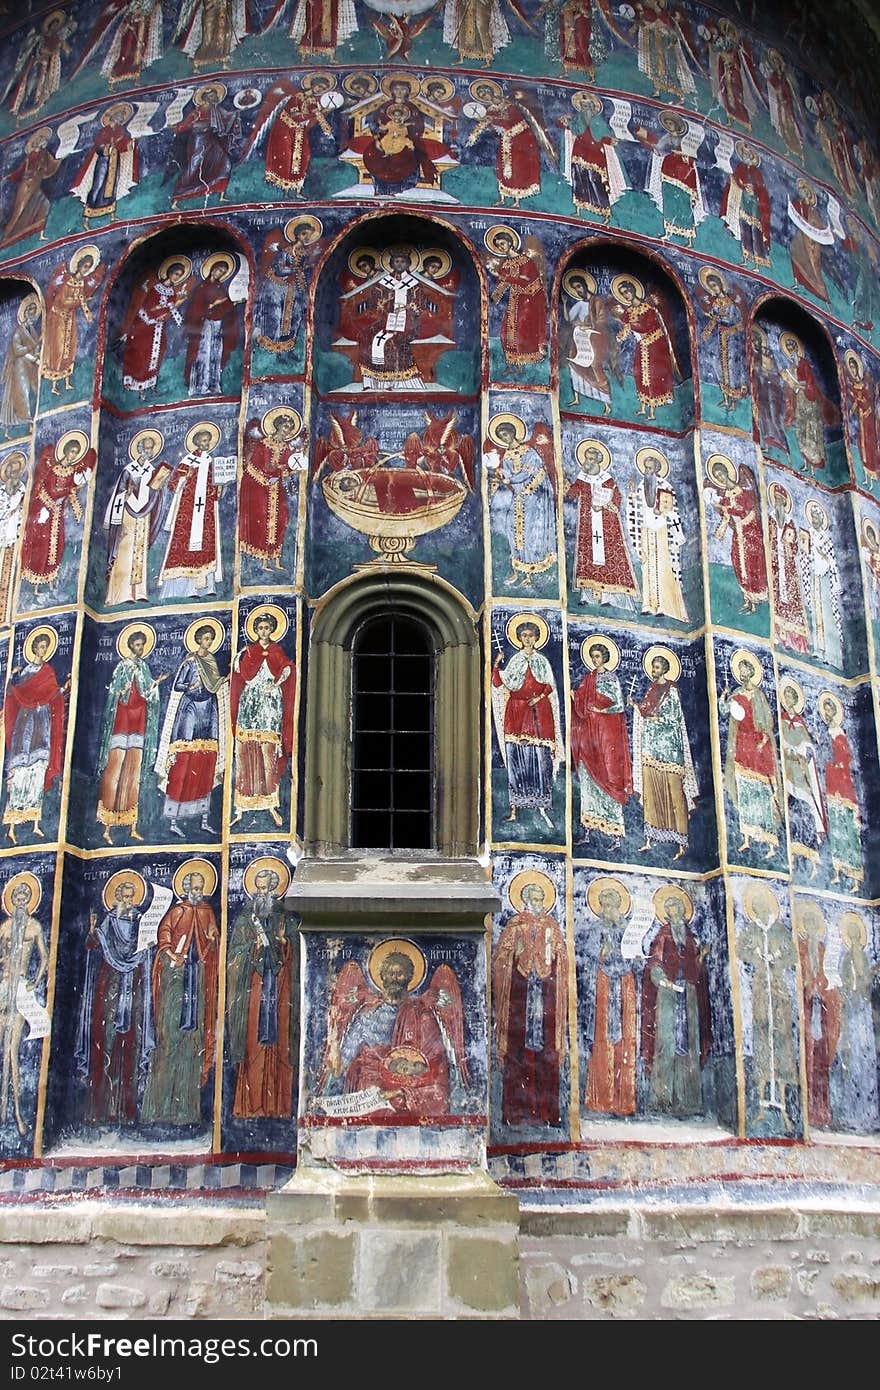 This image represents a painting on a old monastery from Romania!